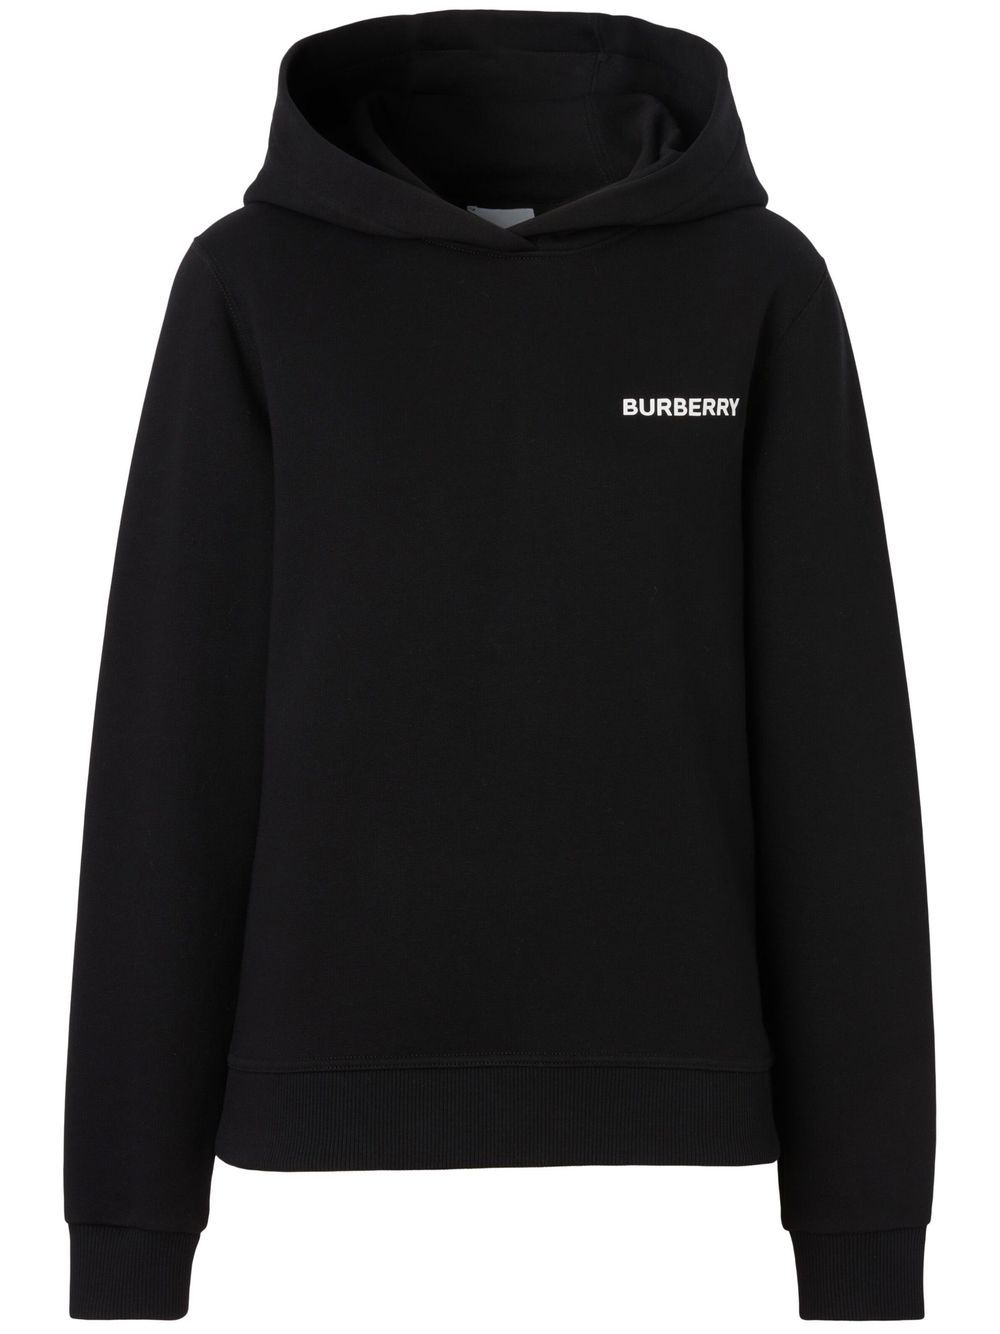 Burberry Horseferry Square Print Hoodie In Black